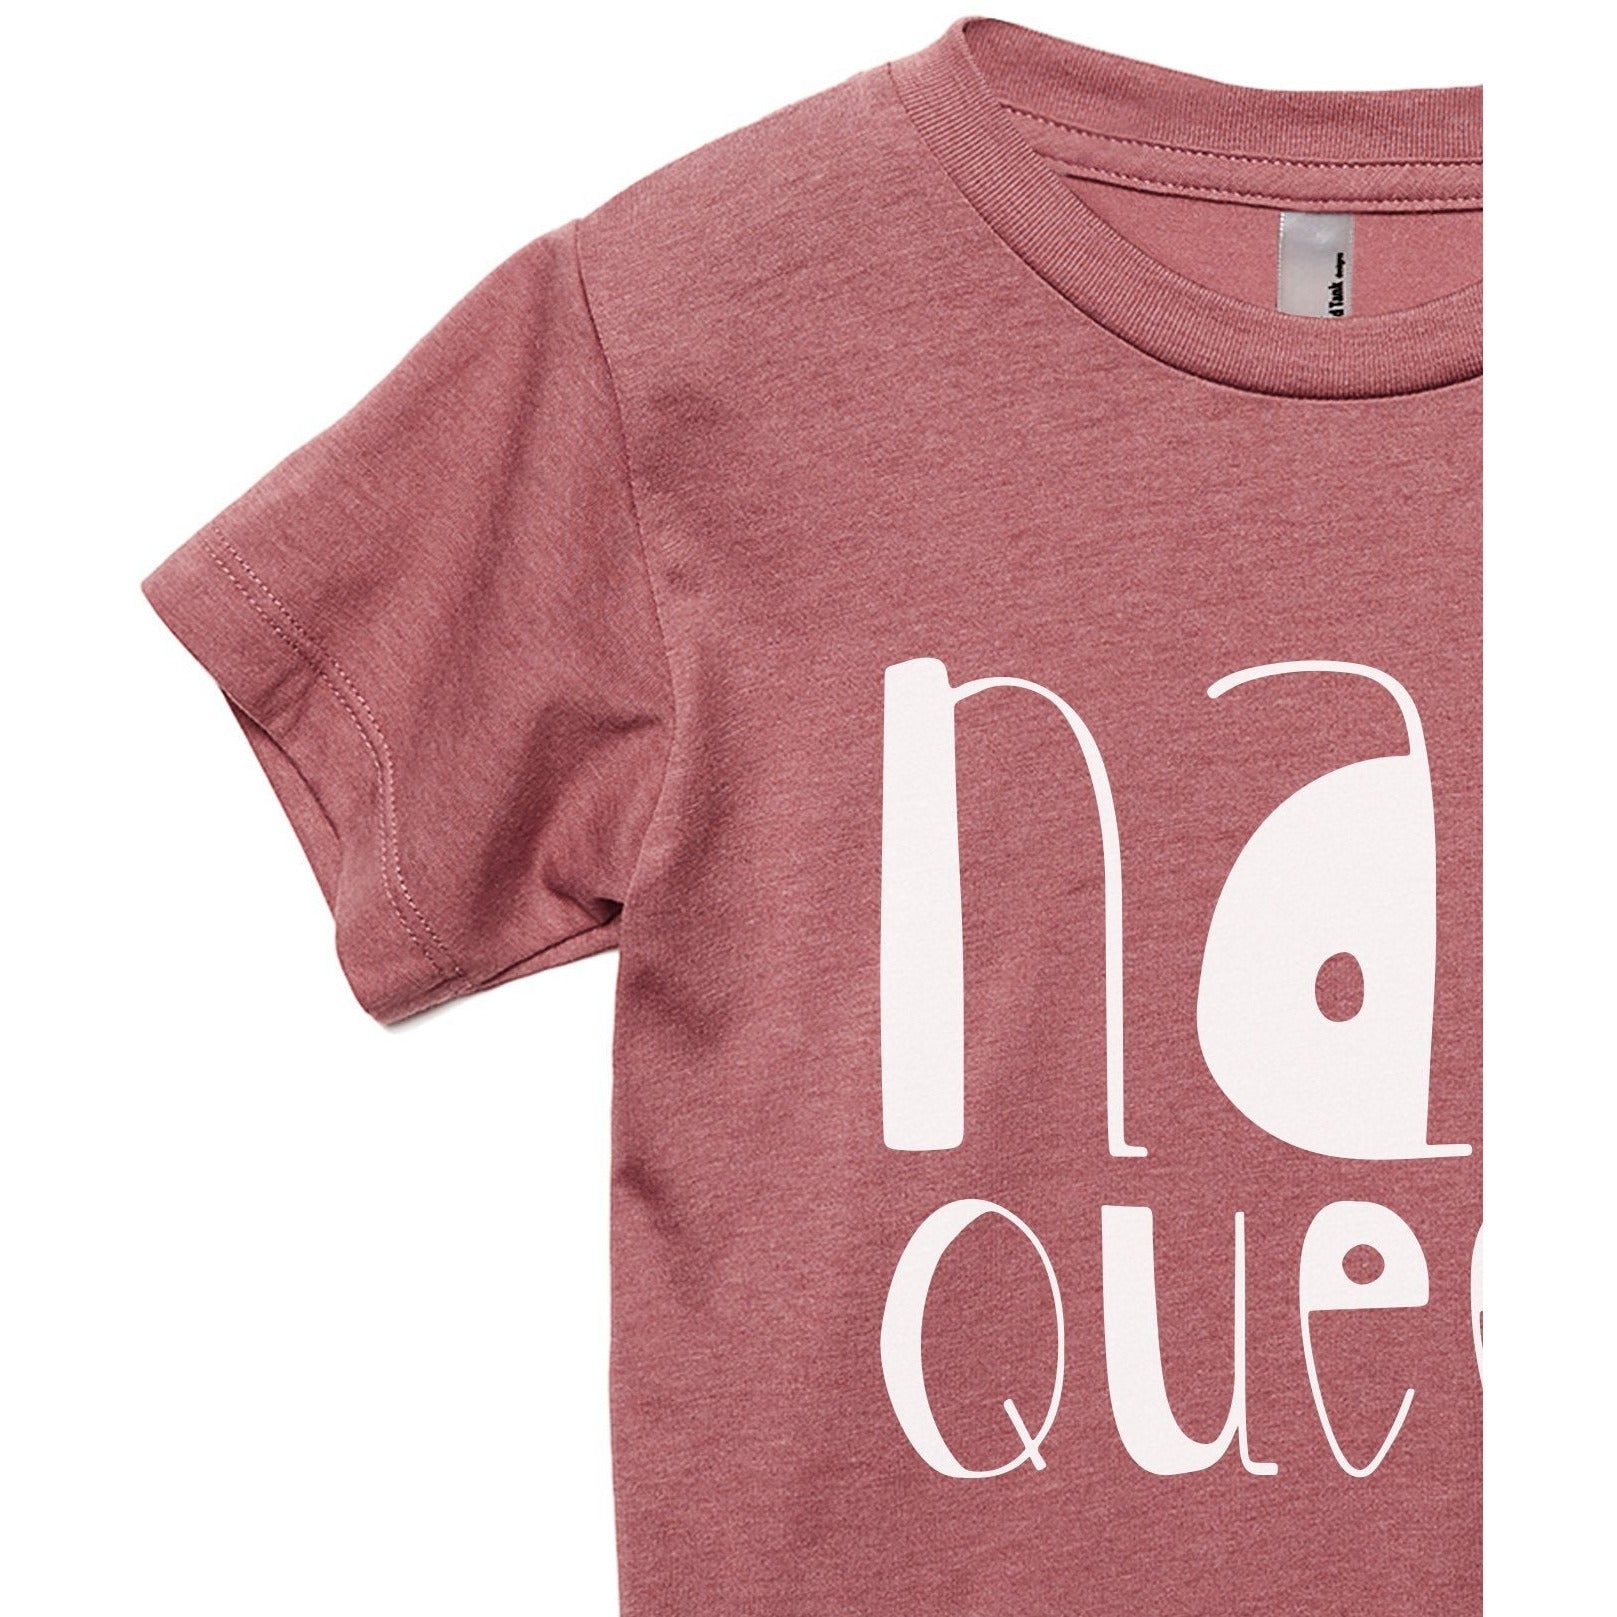 Nap Queen Toddler's Go-To Crewneck Tee Heather Grey Close Up Sleeves Collar Details
